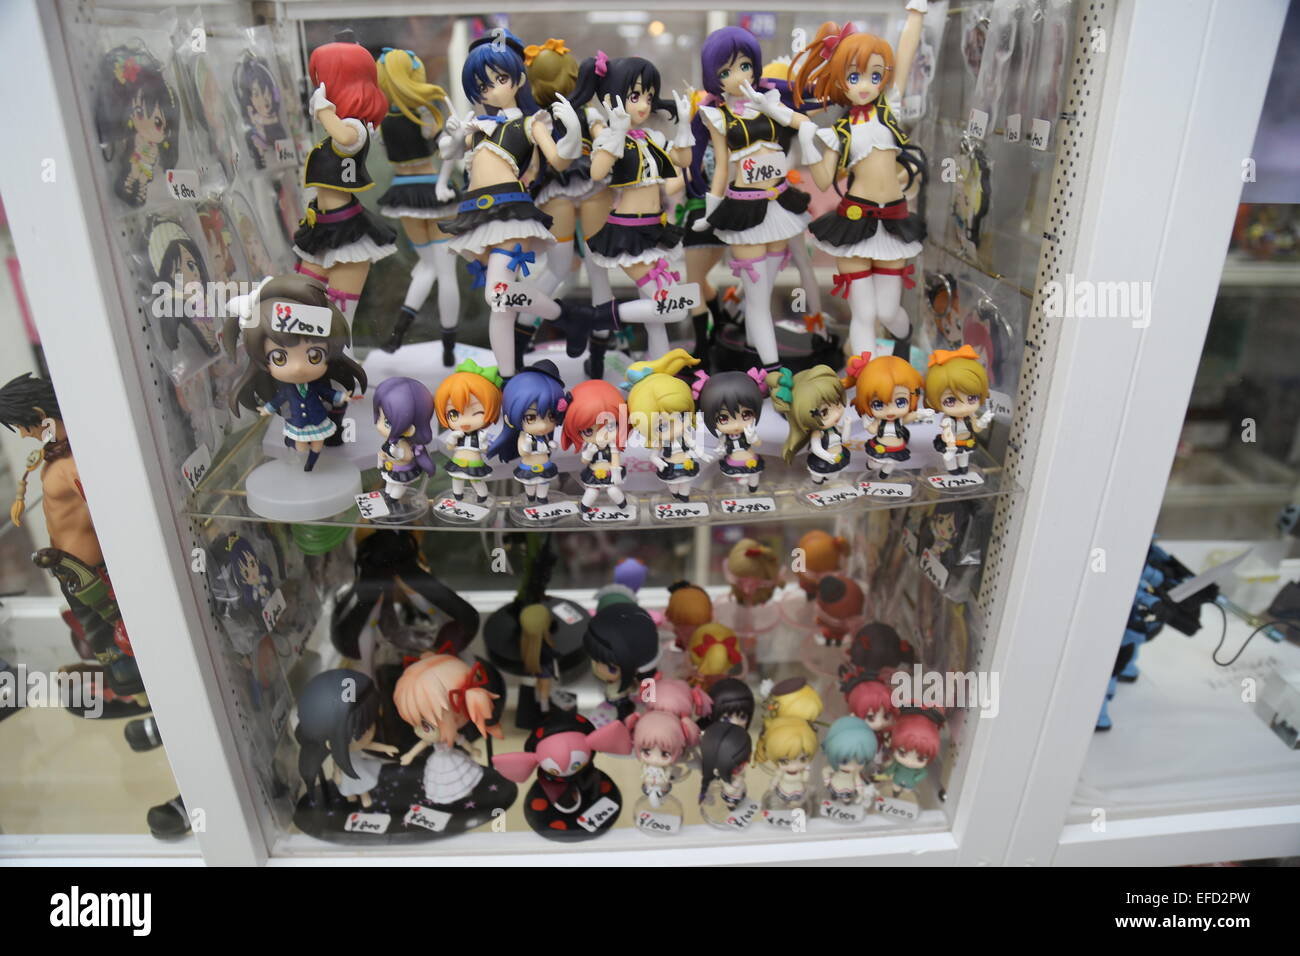 Japan Second Hand Shop for Anime Action Figures ipad watches etc   YouTube